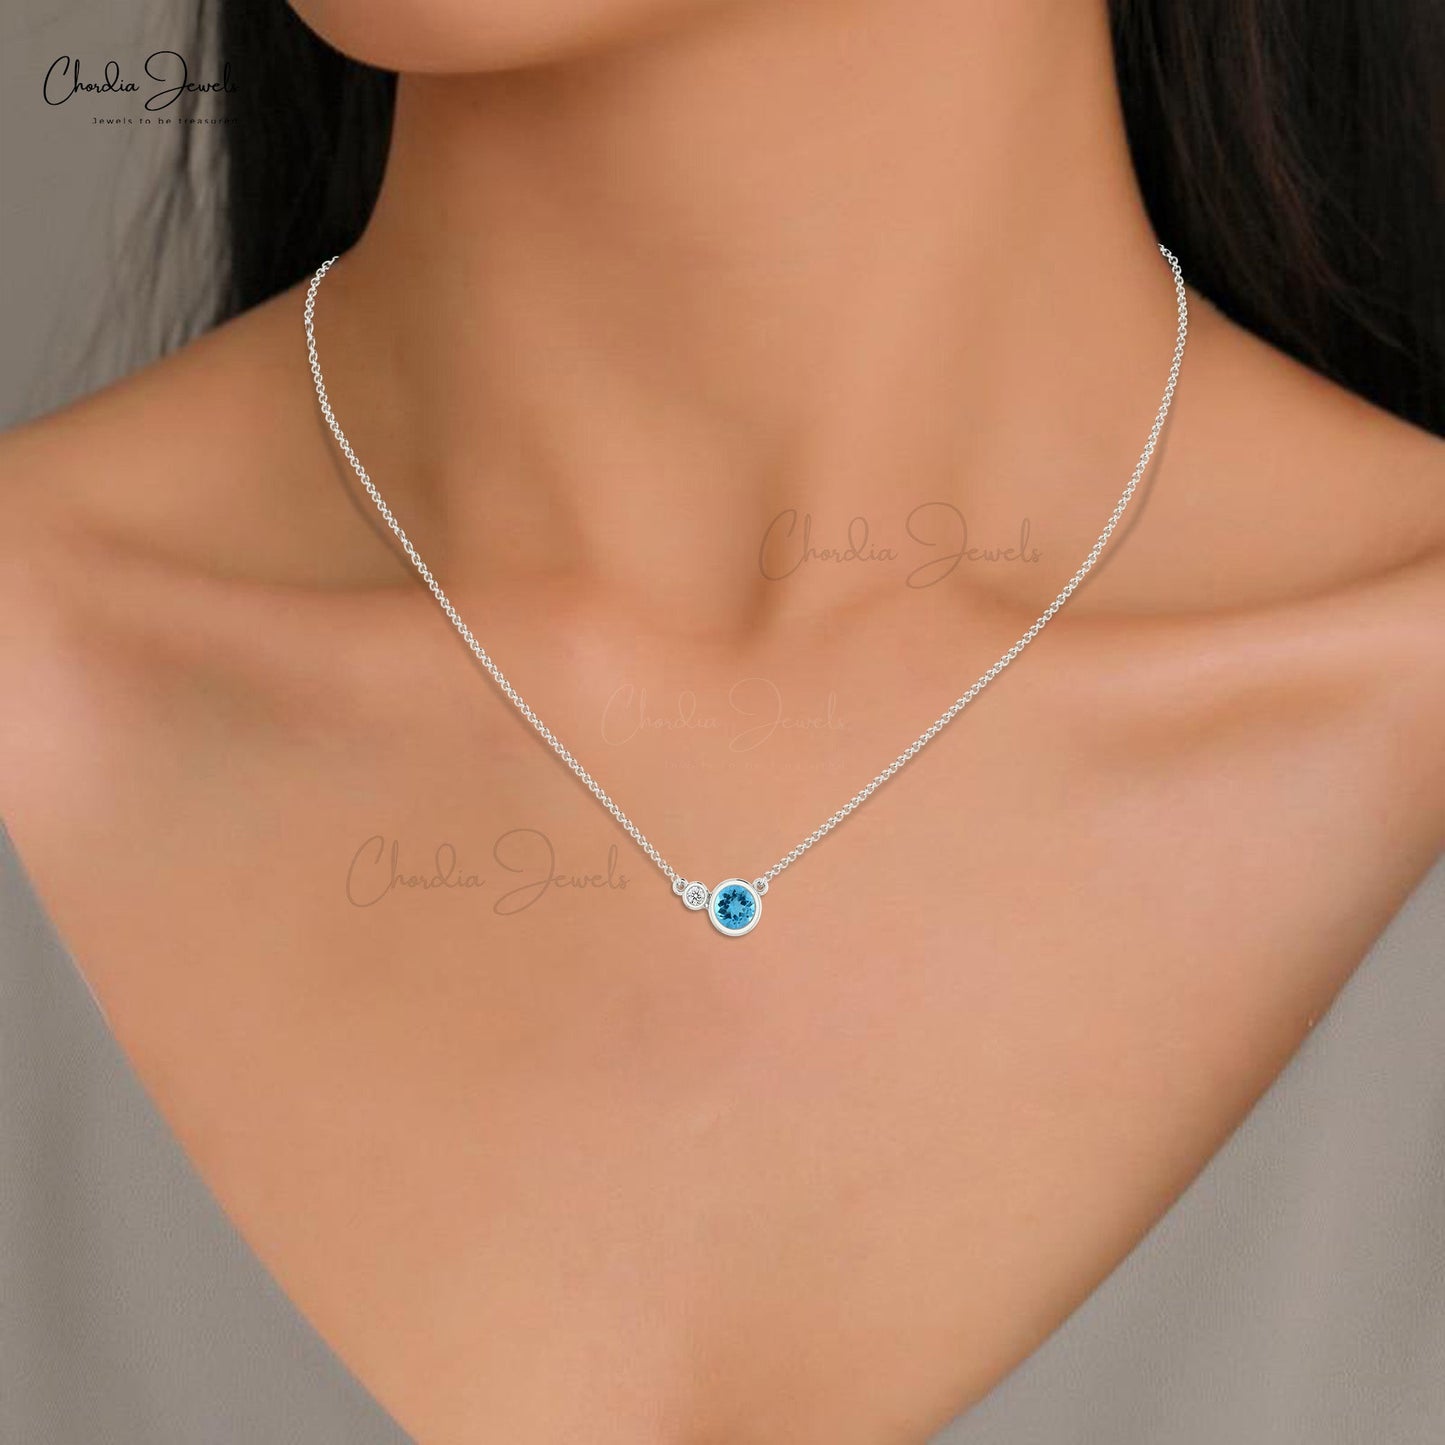 Natural Swiss Blue Topaz and Diamond Necklace, 5mm Round Gemstone Necklace in 14k Solid Gold Necklace, December Birthstone Necklace Gift for Her